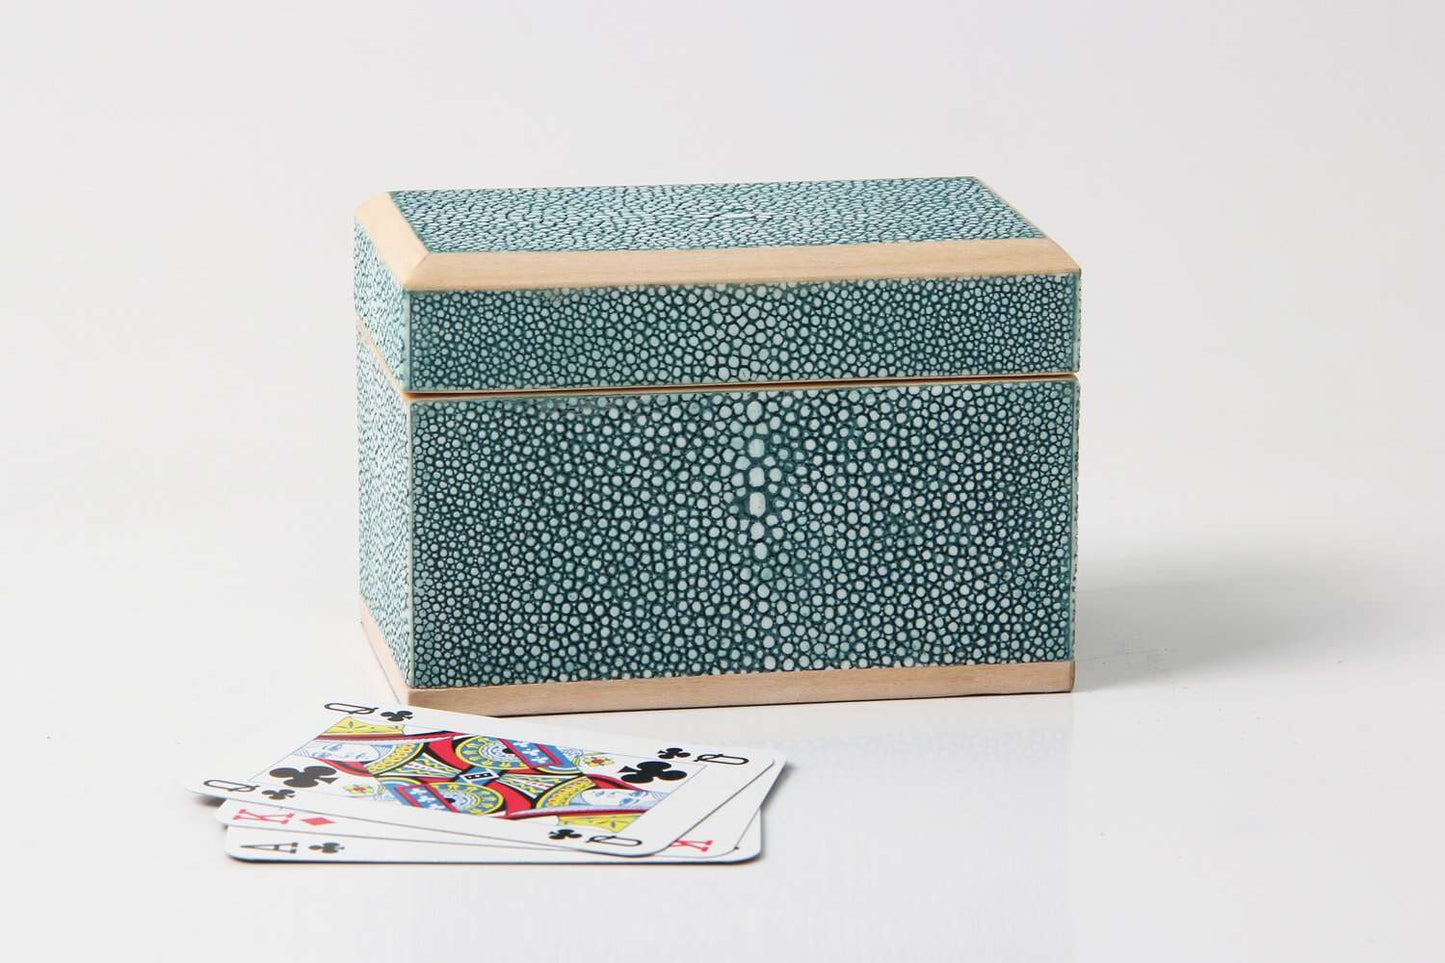  playing card box unique teal shagreen playing card box